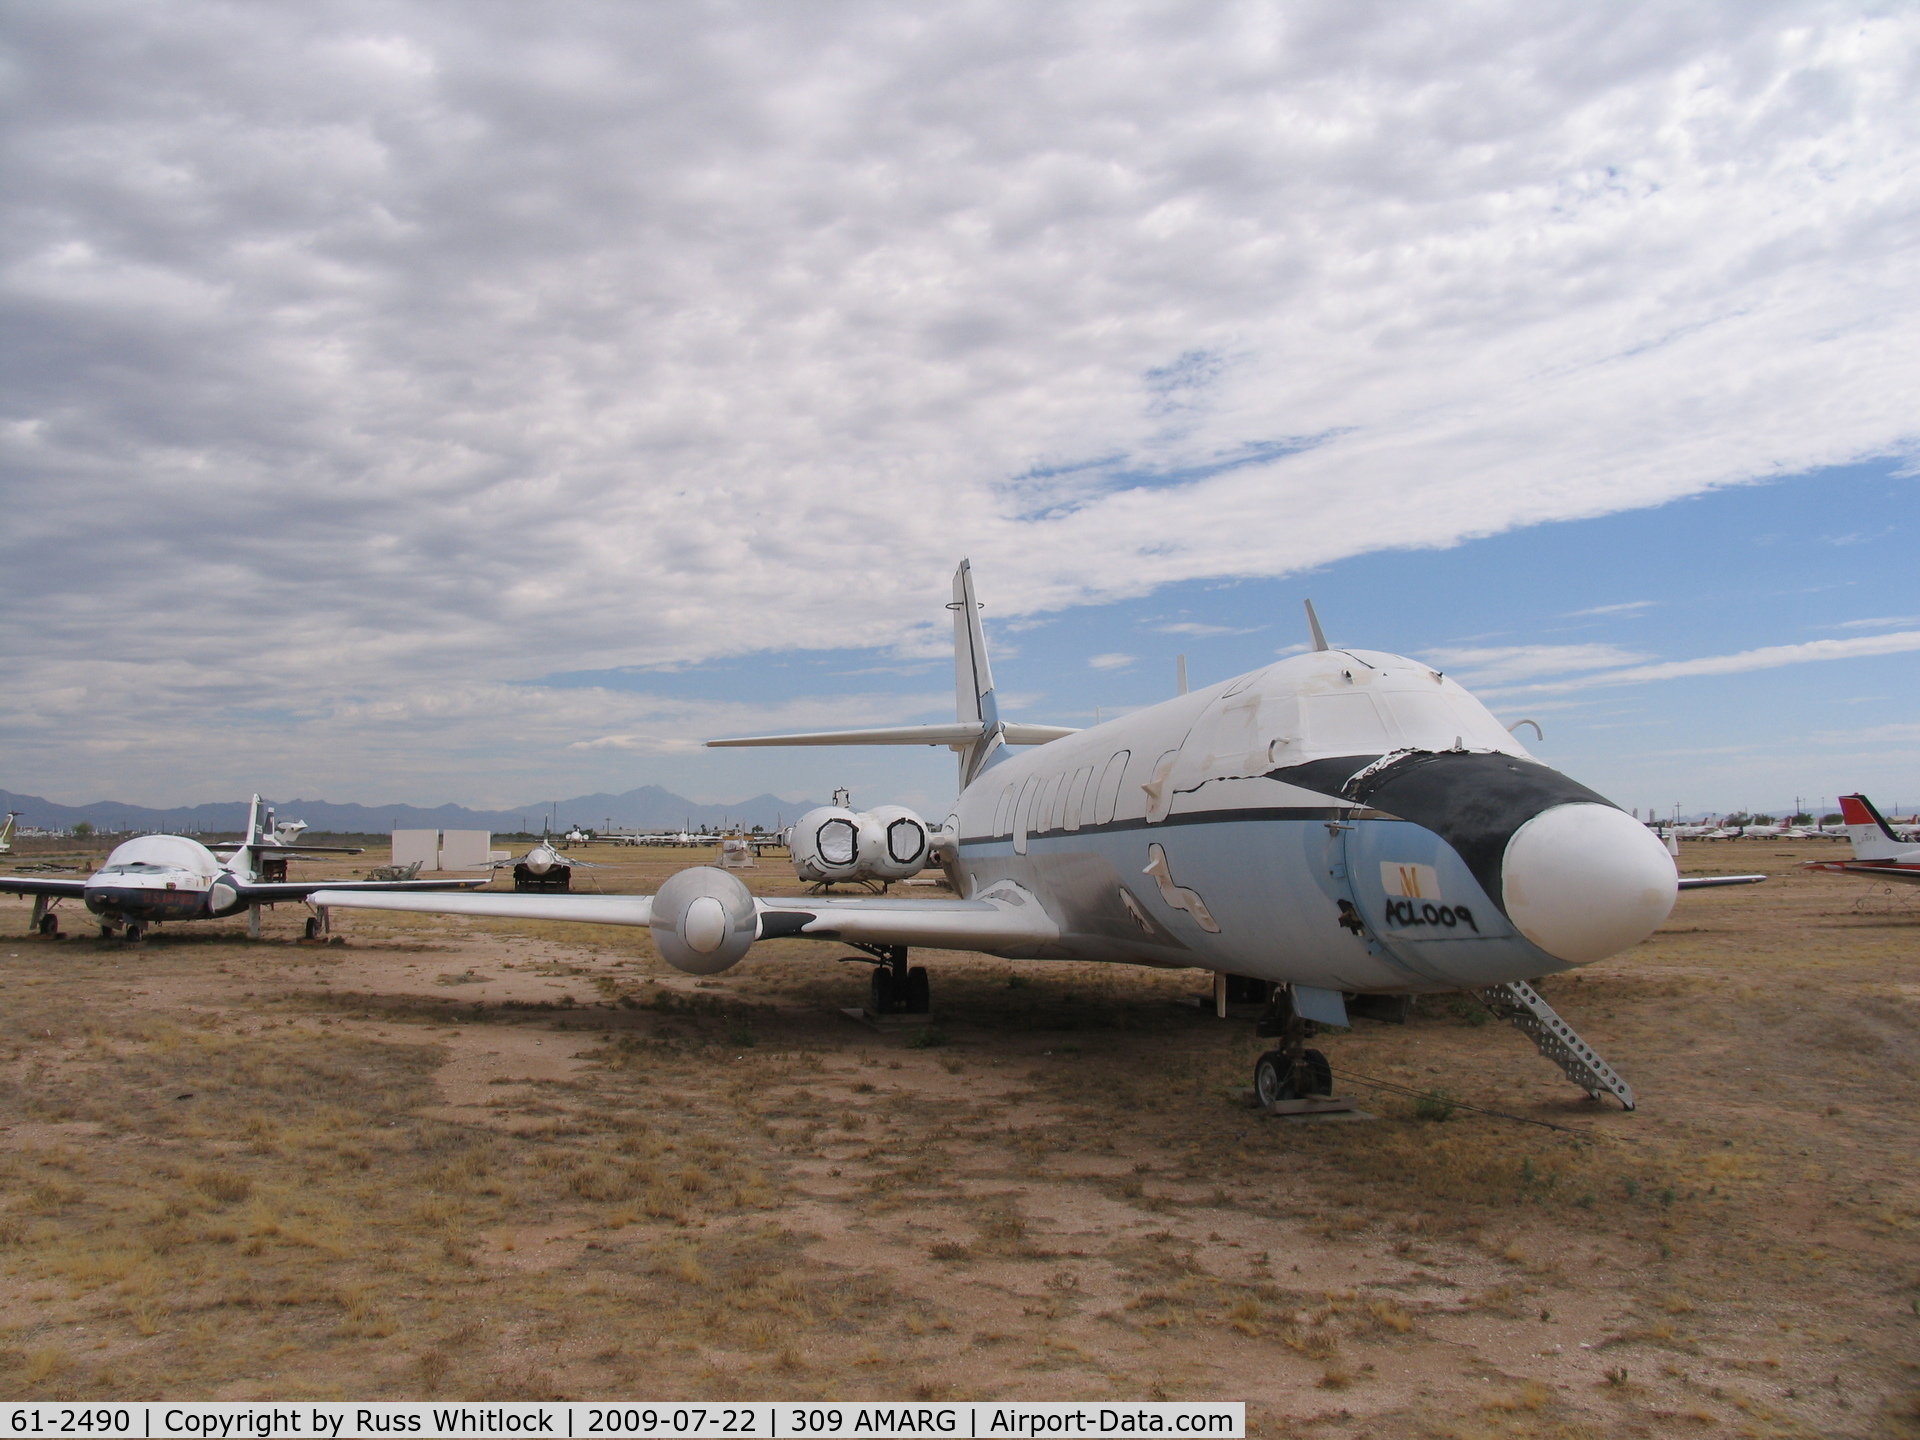 61-2490, 1962 Lockheed VC-140B-LM Jetstar C/N 1329-5024, Photo as stored at Davis-Monthan AFB, Tucson.  Plane set to be transferred to National Park Service at LBJ Ranch, Texas